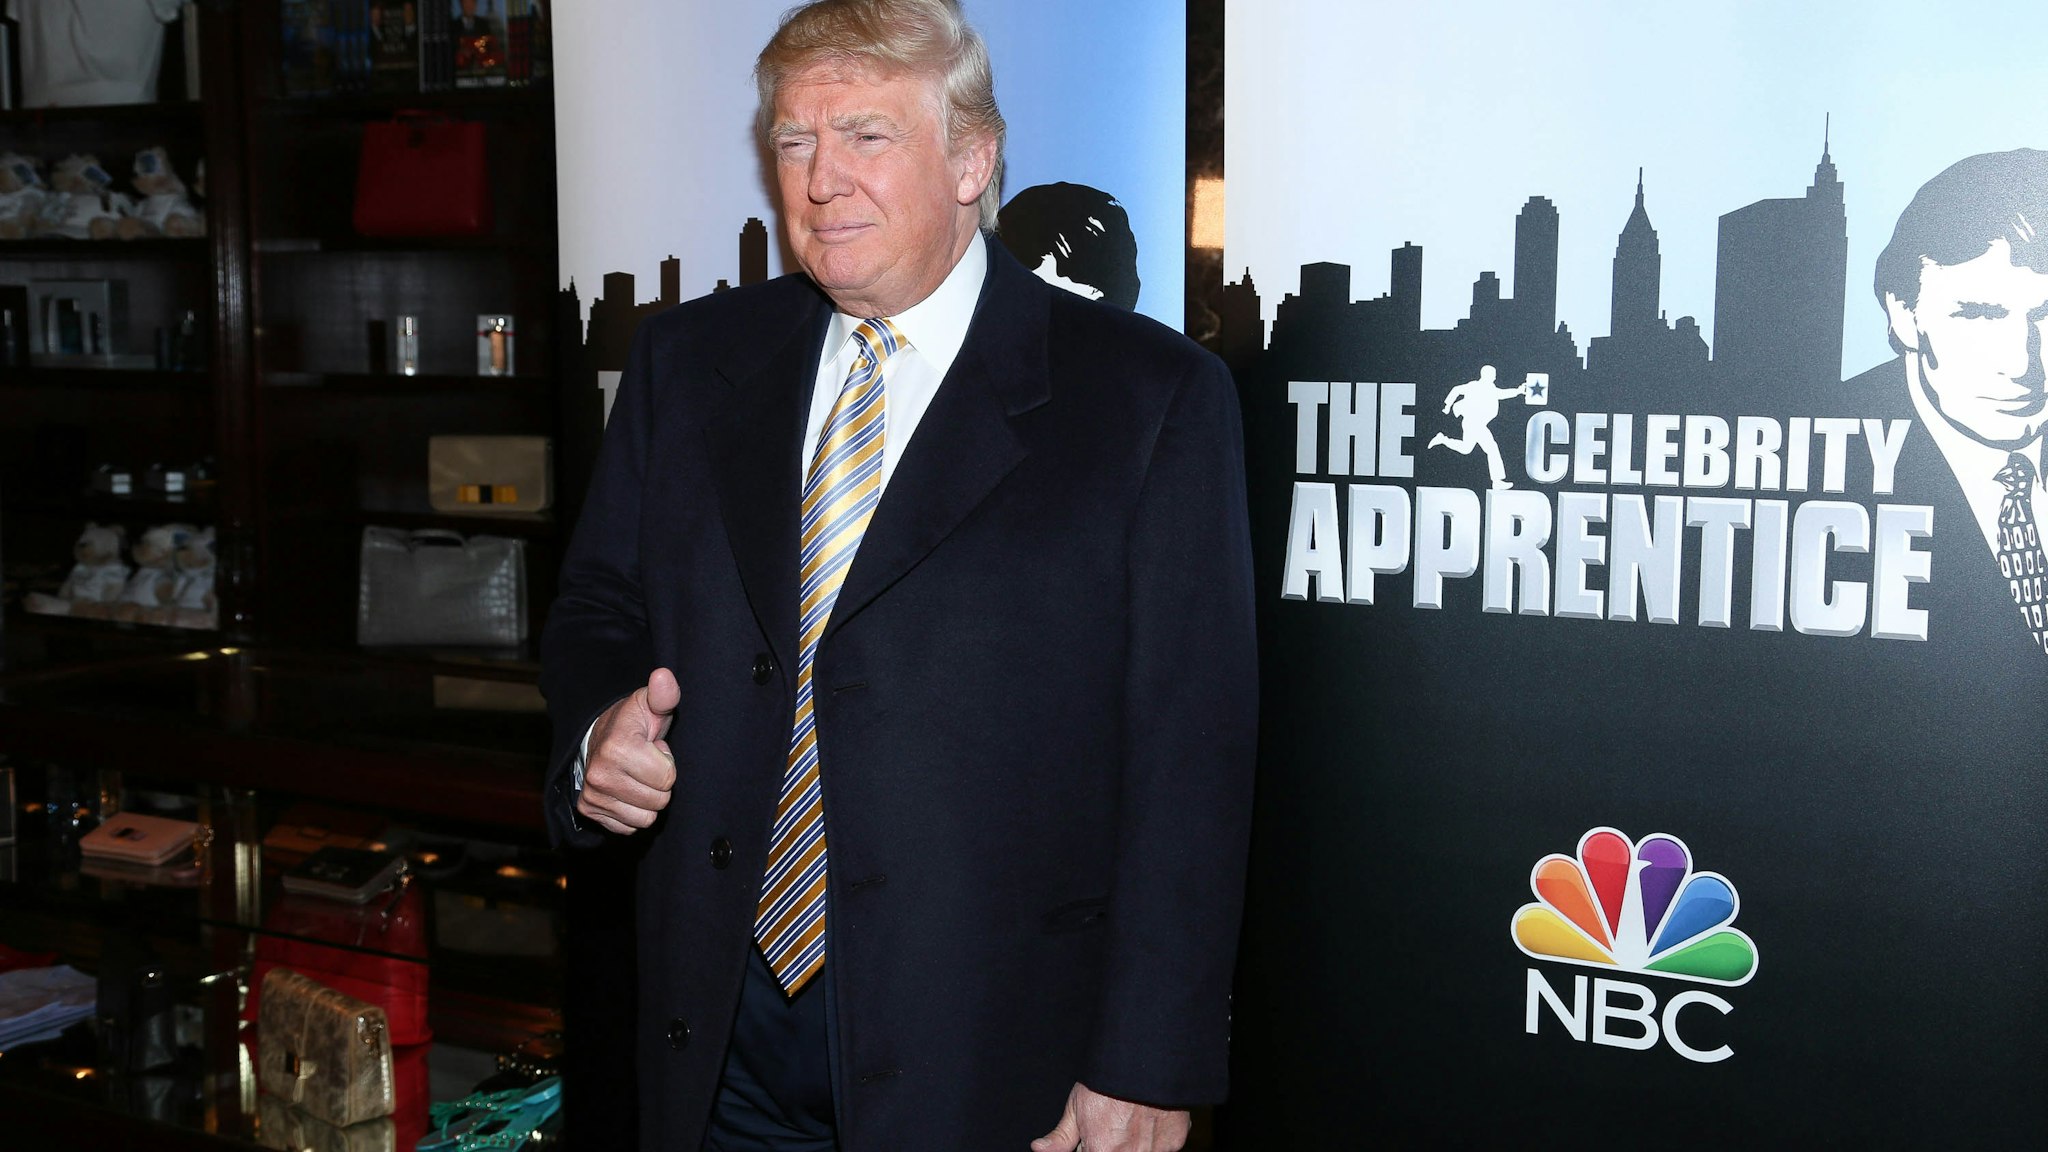 EW YORK, NY - JANUARY 20: Donald Trump attends "Celebrity Apprentice" Red Carpet Event at Trump Tower on January 20, 2015 in New York City. (Photo by Rob Kim/Getty Images)